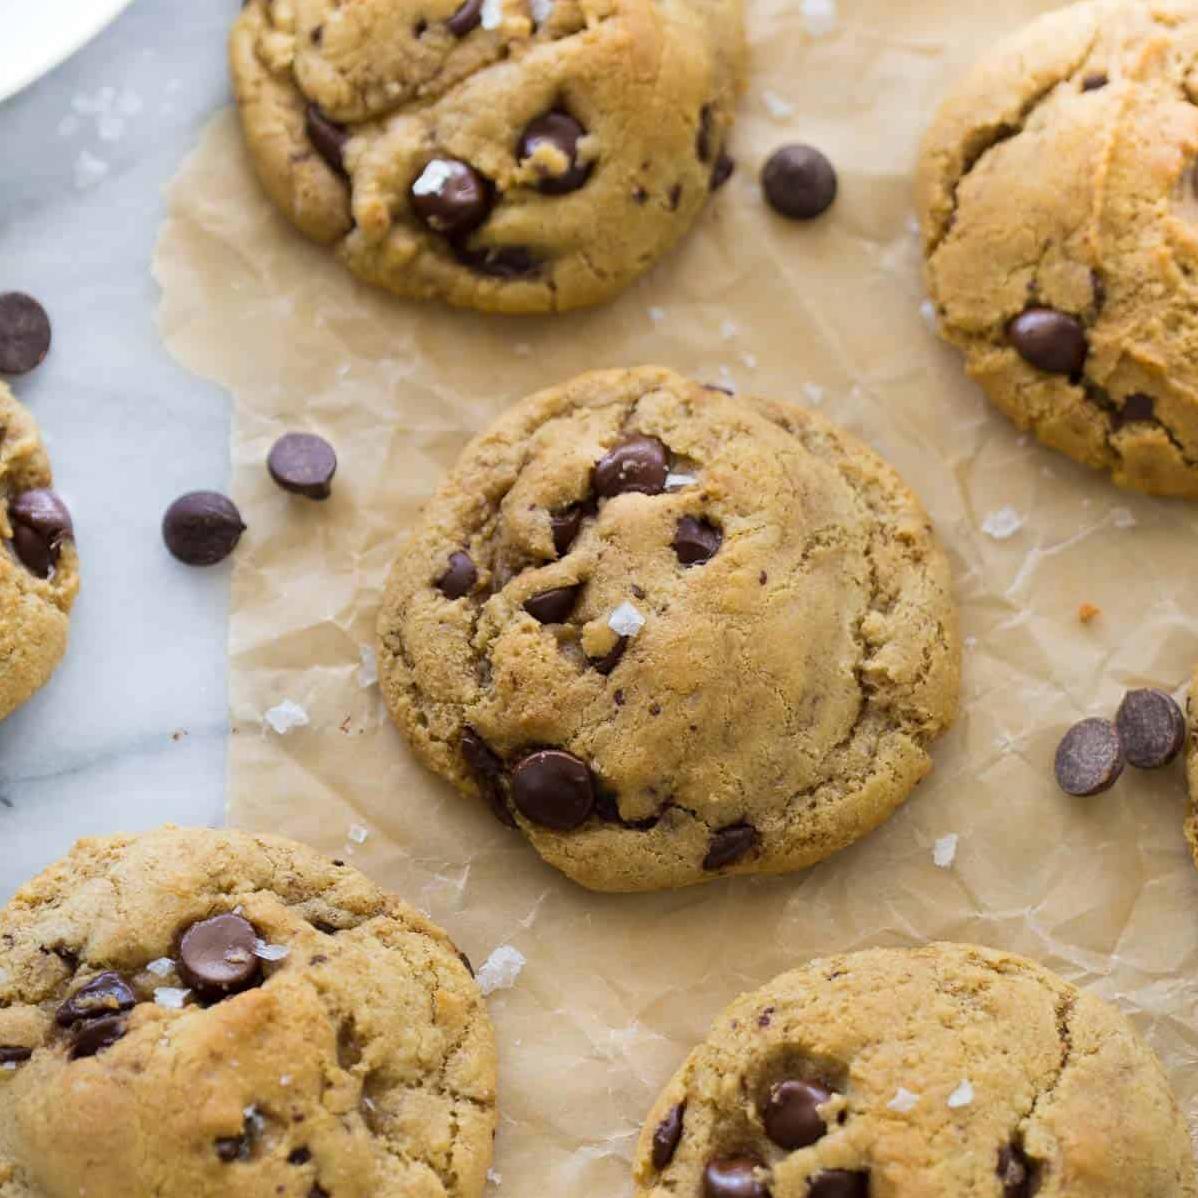  Bite into a warm and gooey chocolate chip cookie